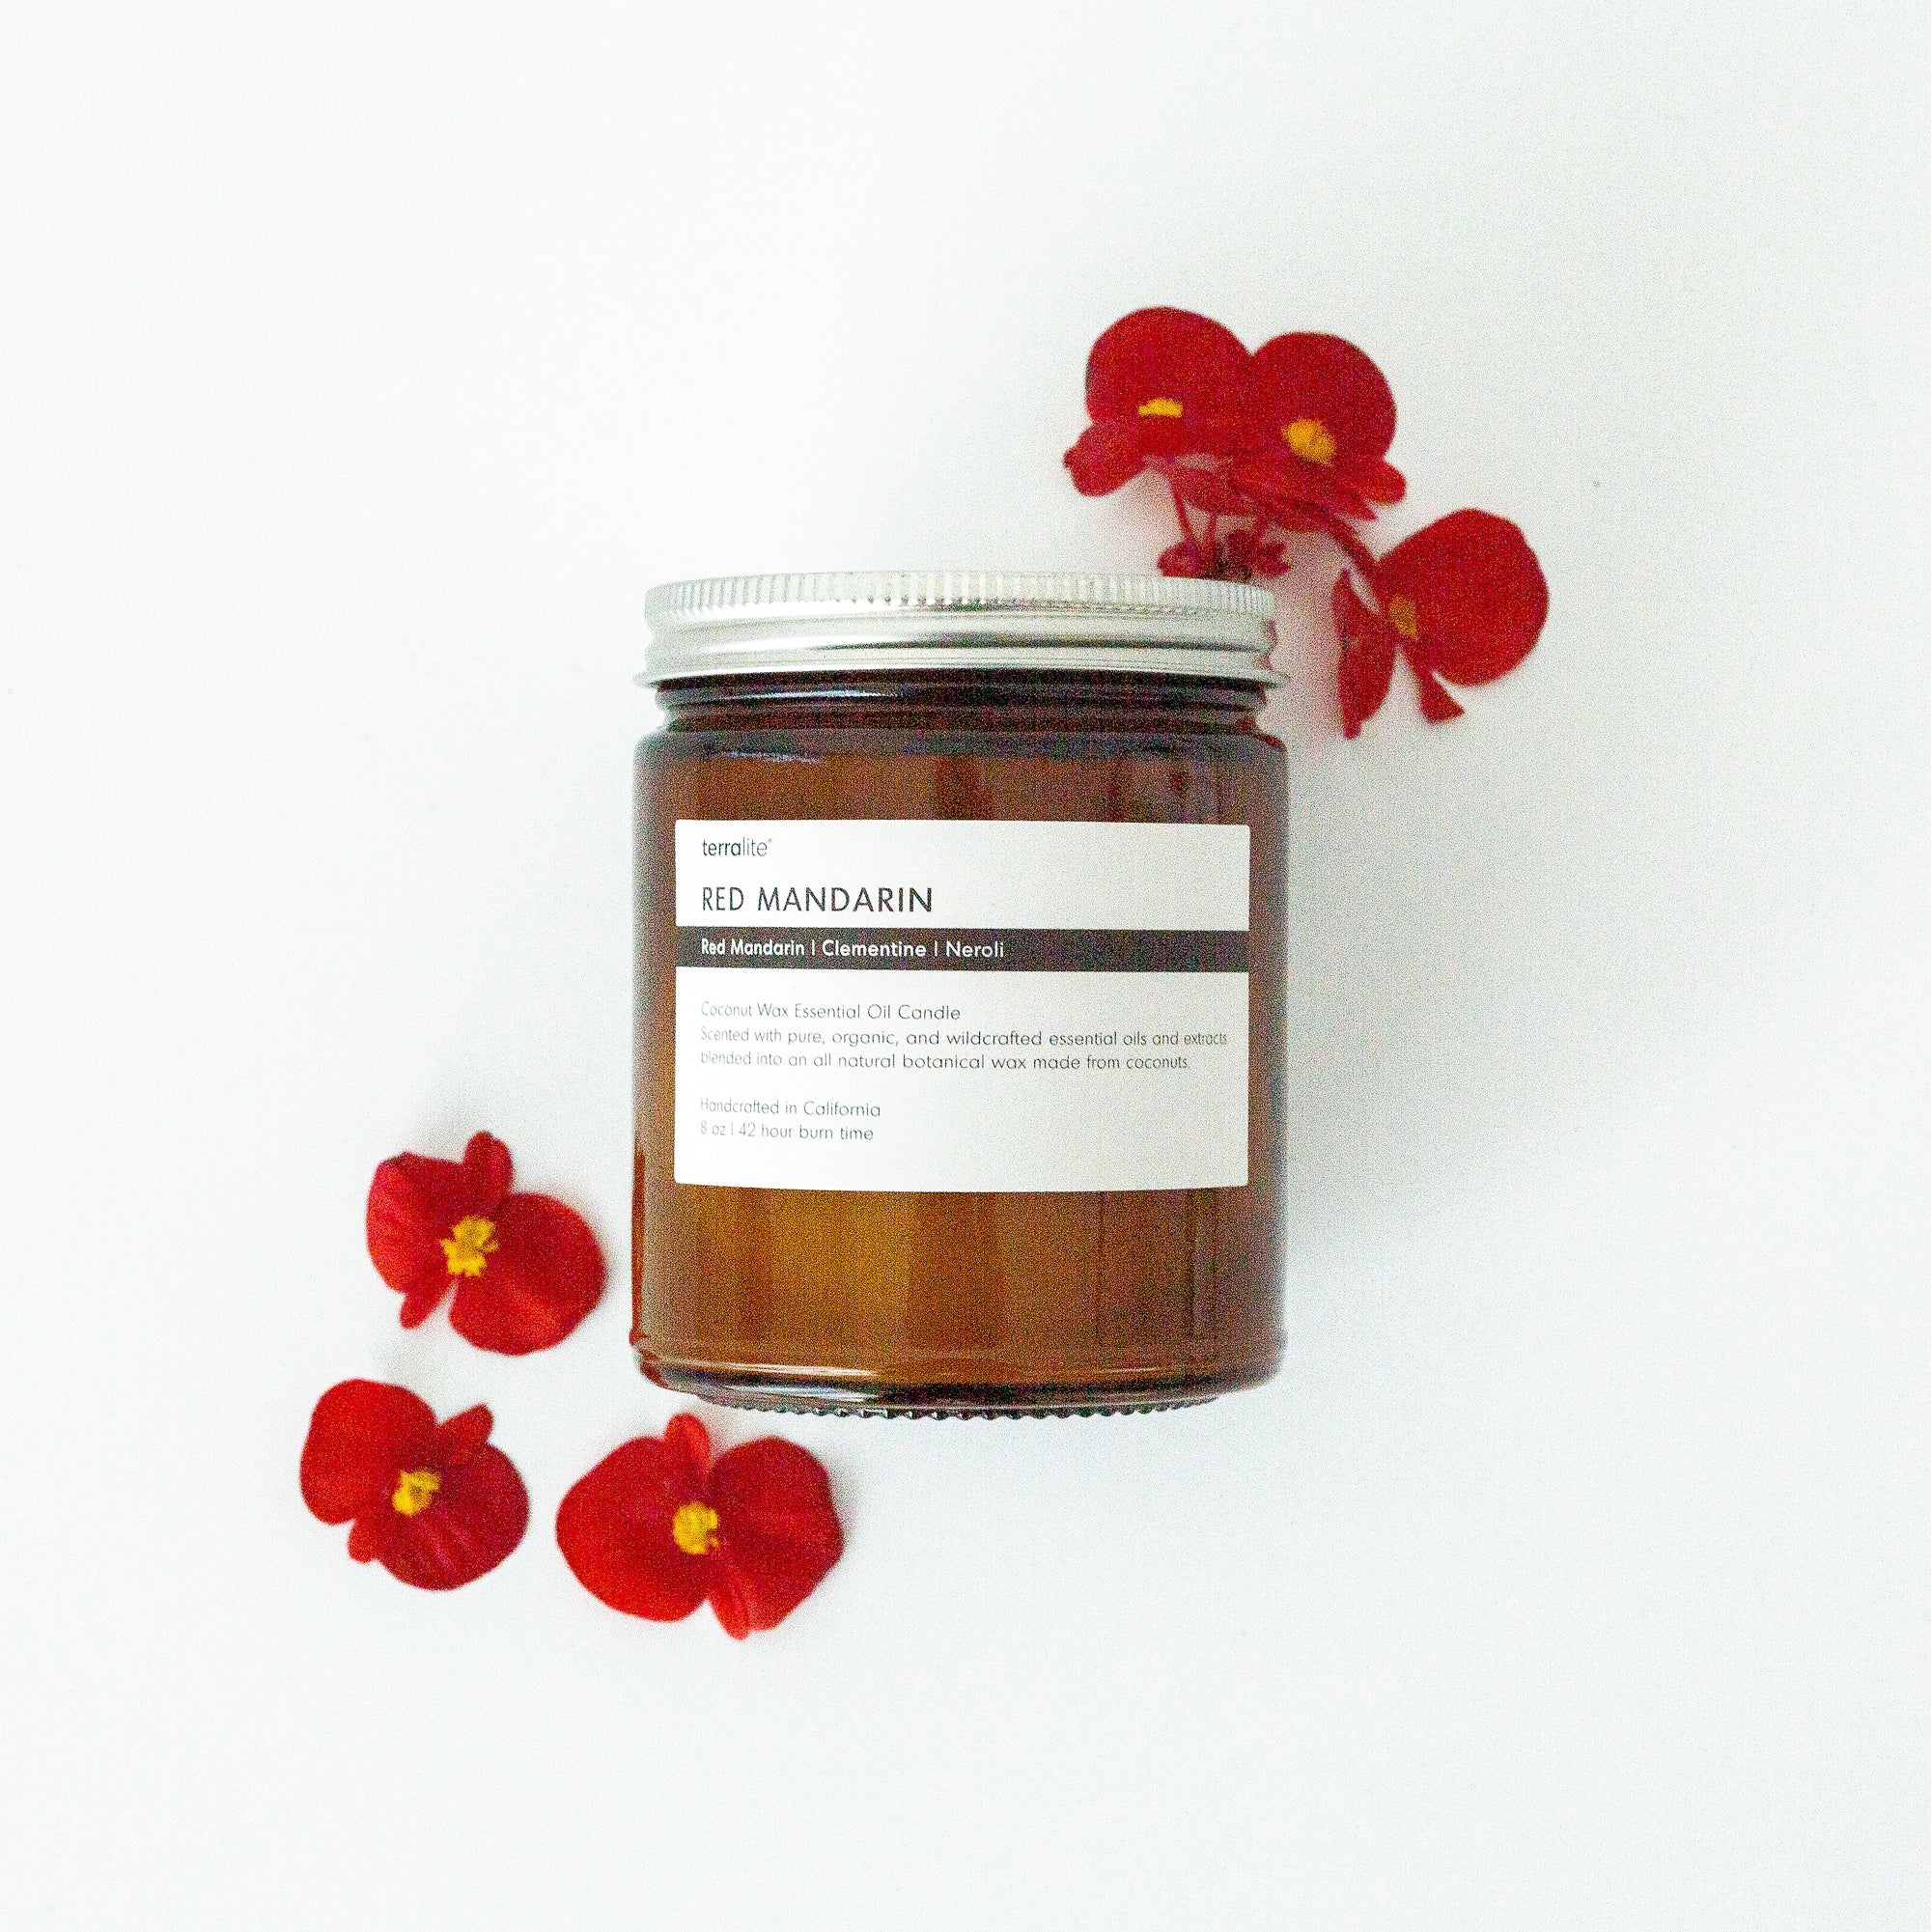 Red Mandarin Essential Oil Candle - 8 oz. made with red mandarin, clementine, and neroli essential oils.